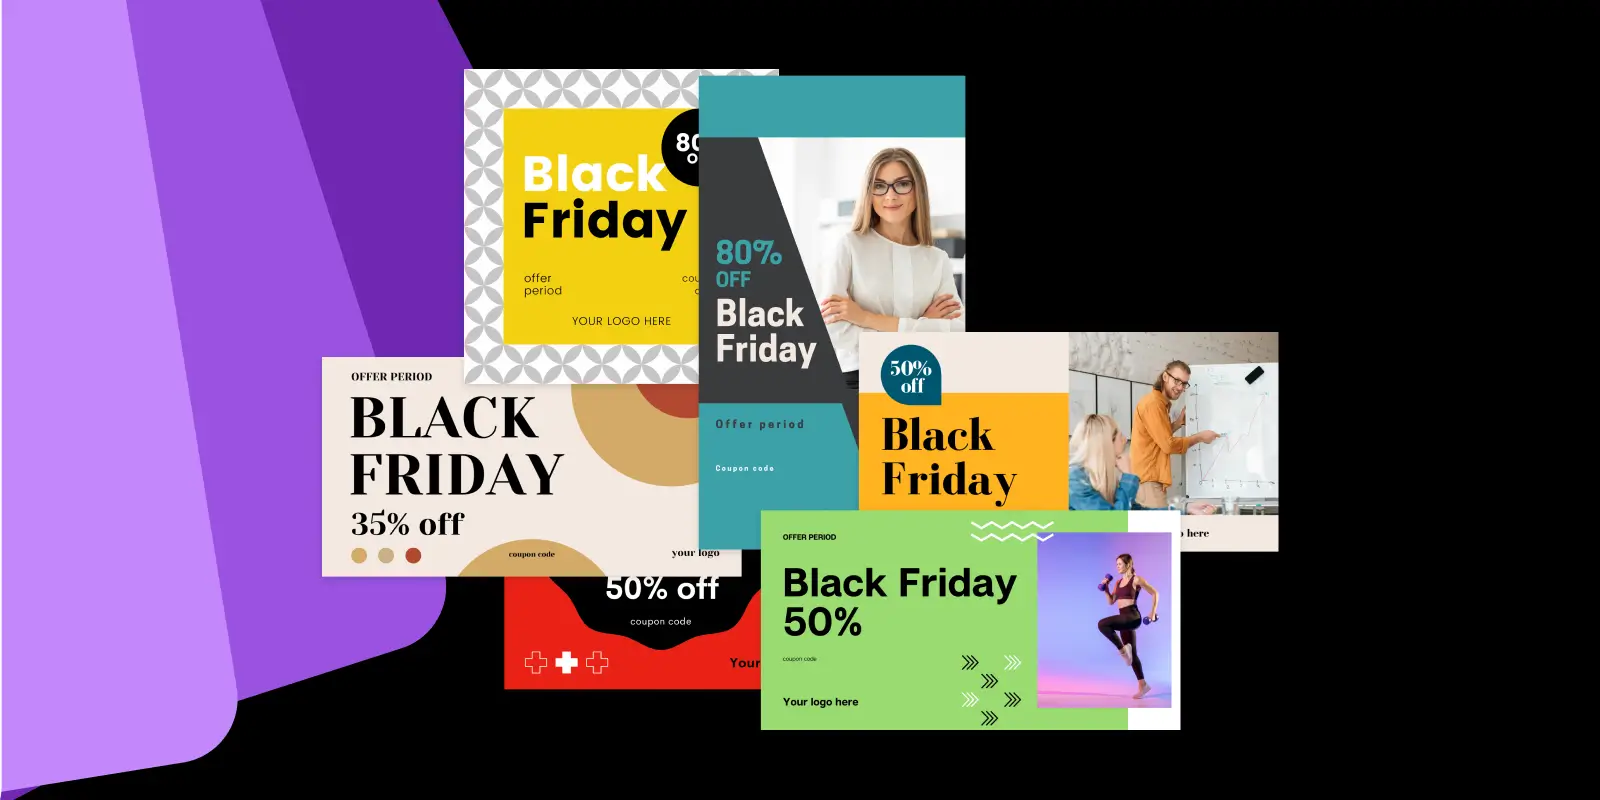 Copy These Black Friday Templates to Promote Your Discounts